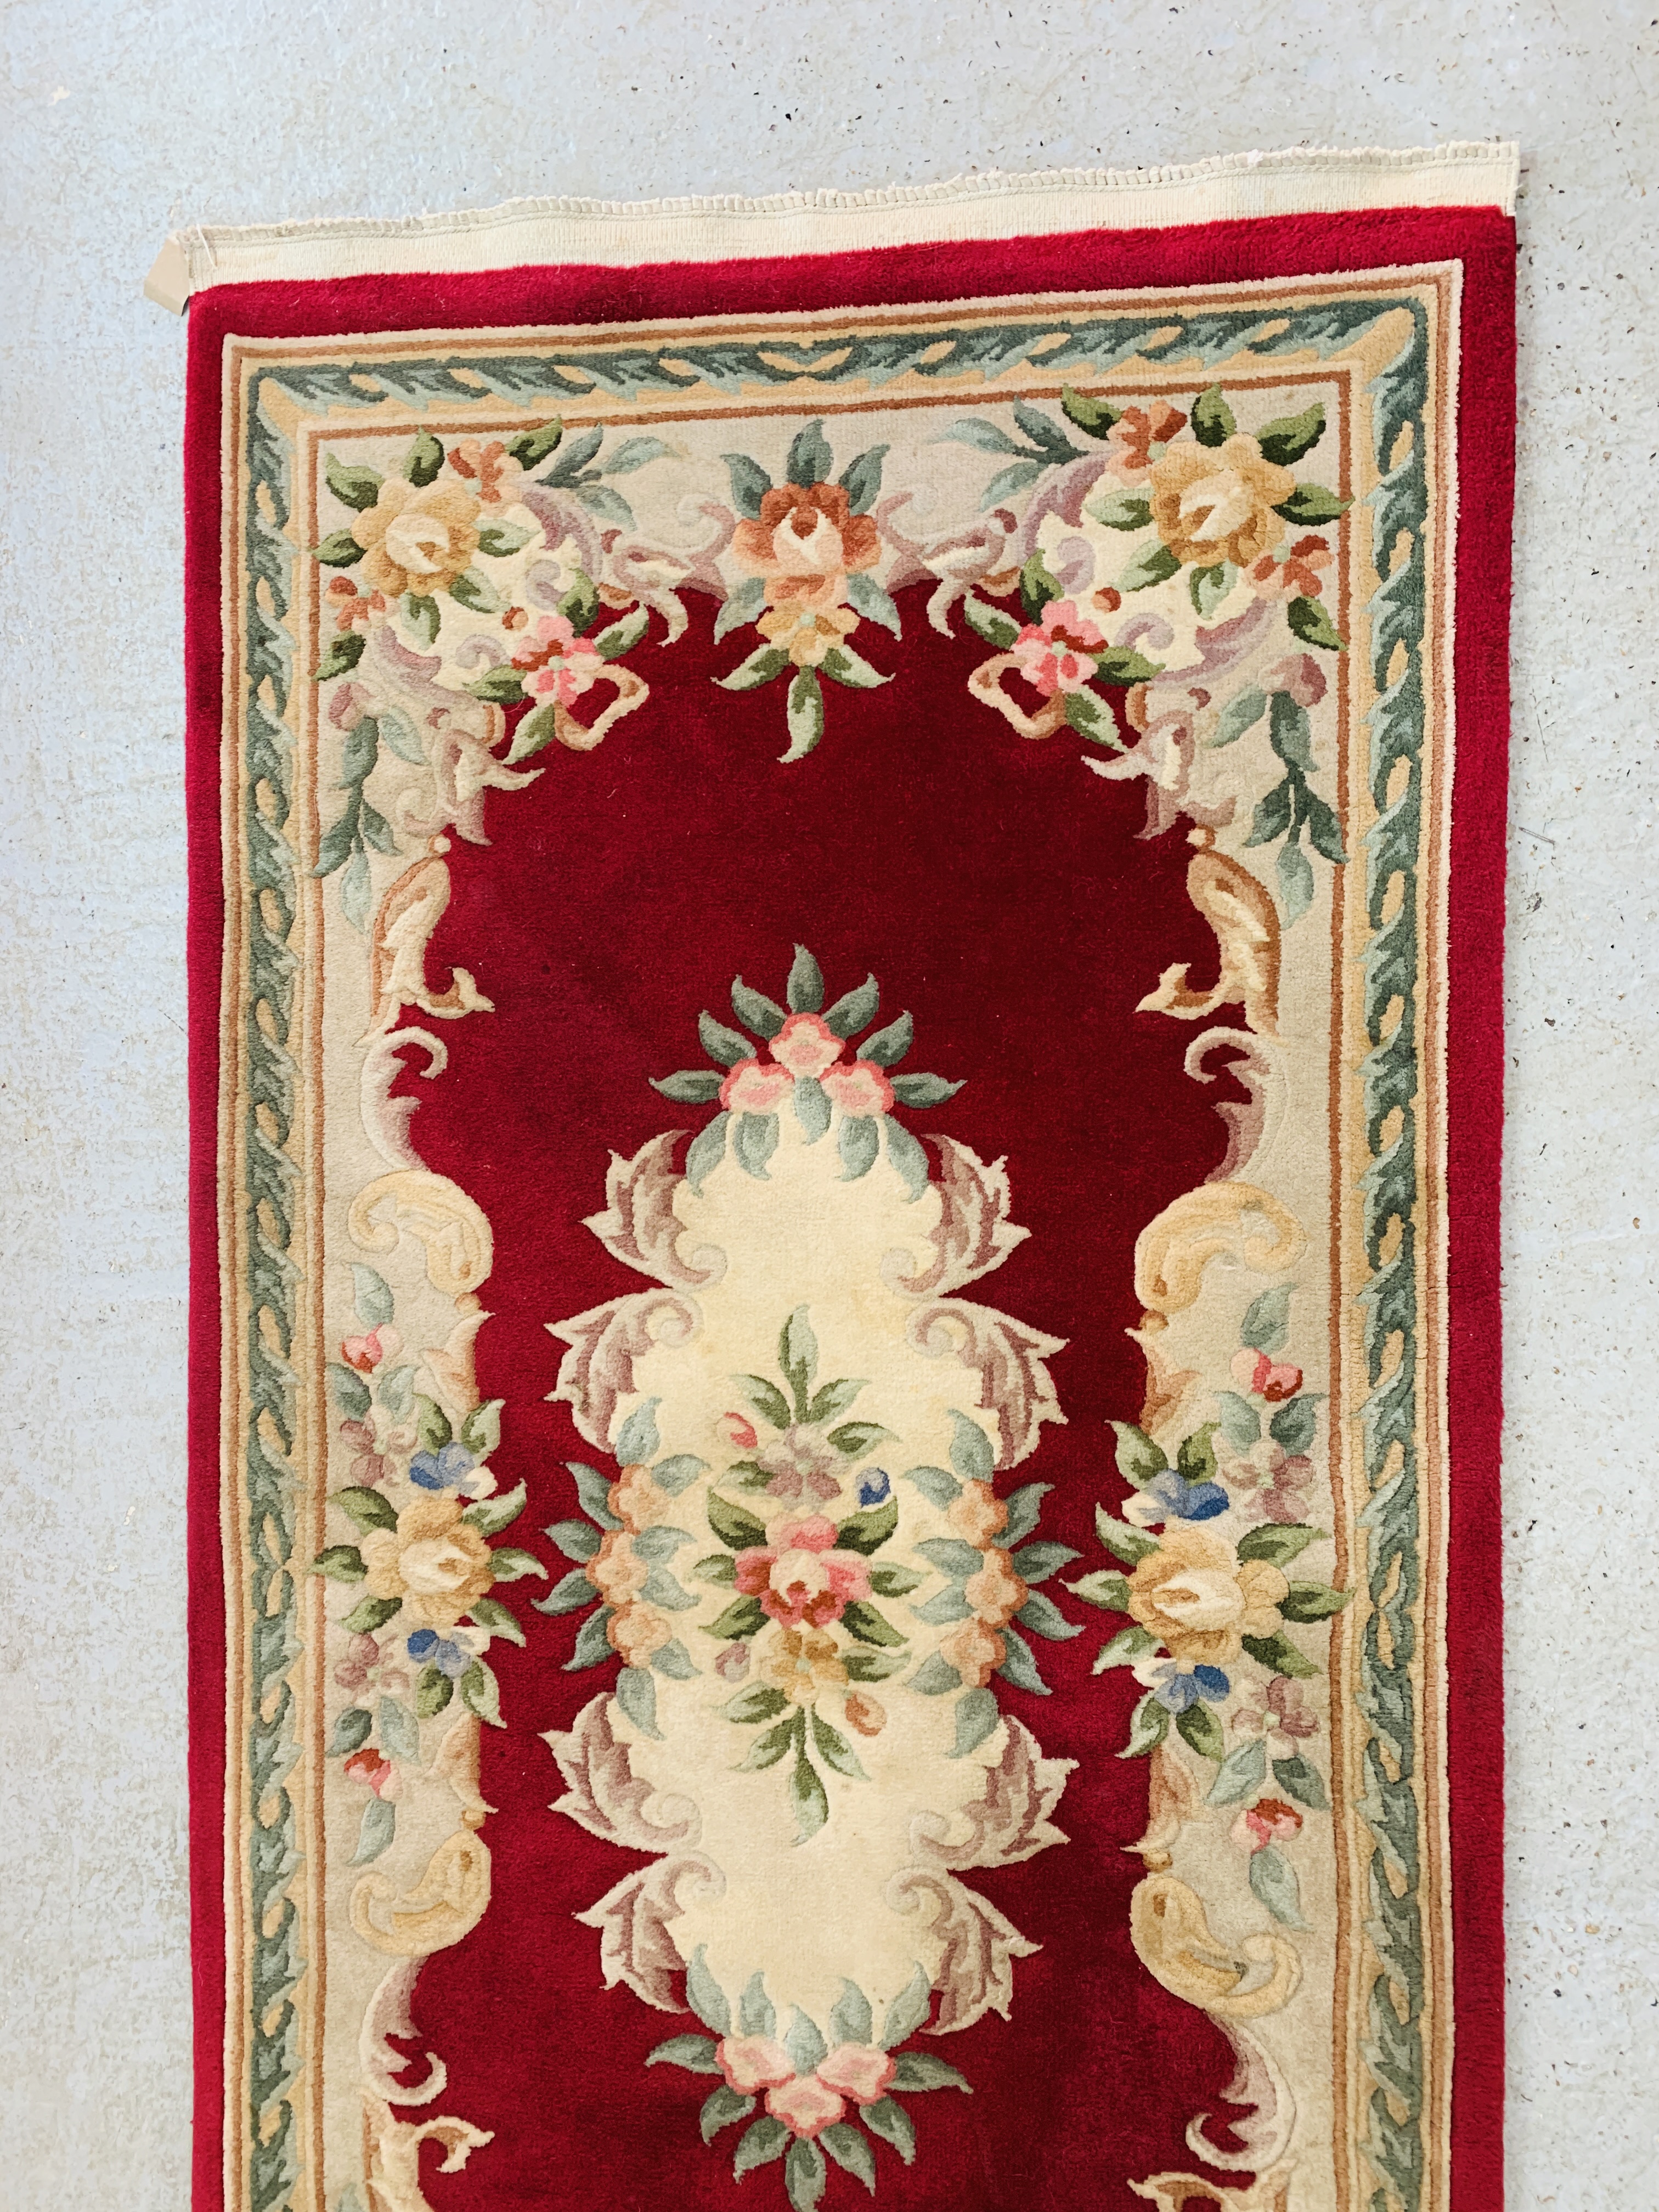 AN ORIENTAL DECORATED RUG 184CM X 92CM AND MODERN MACHINE MADE KEESHAN RED PATTERNED RUG 197 X - Image 11 of 11